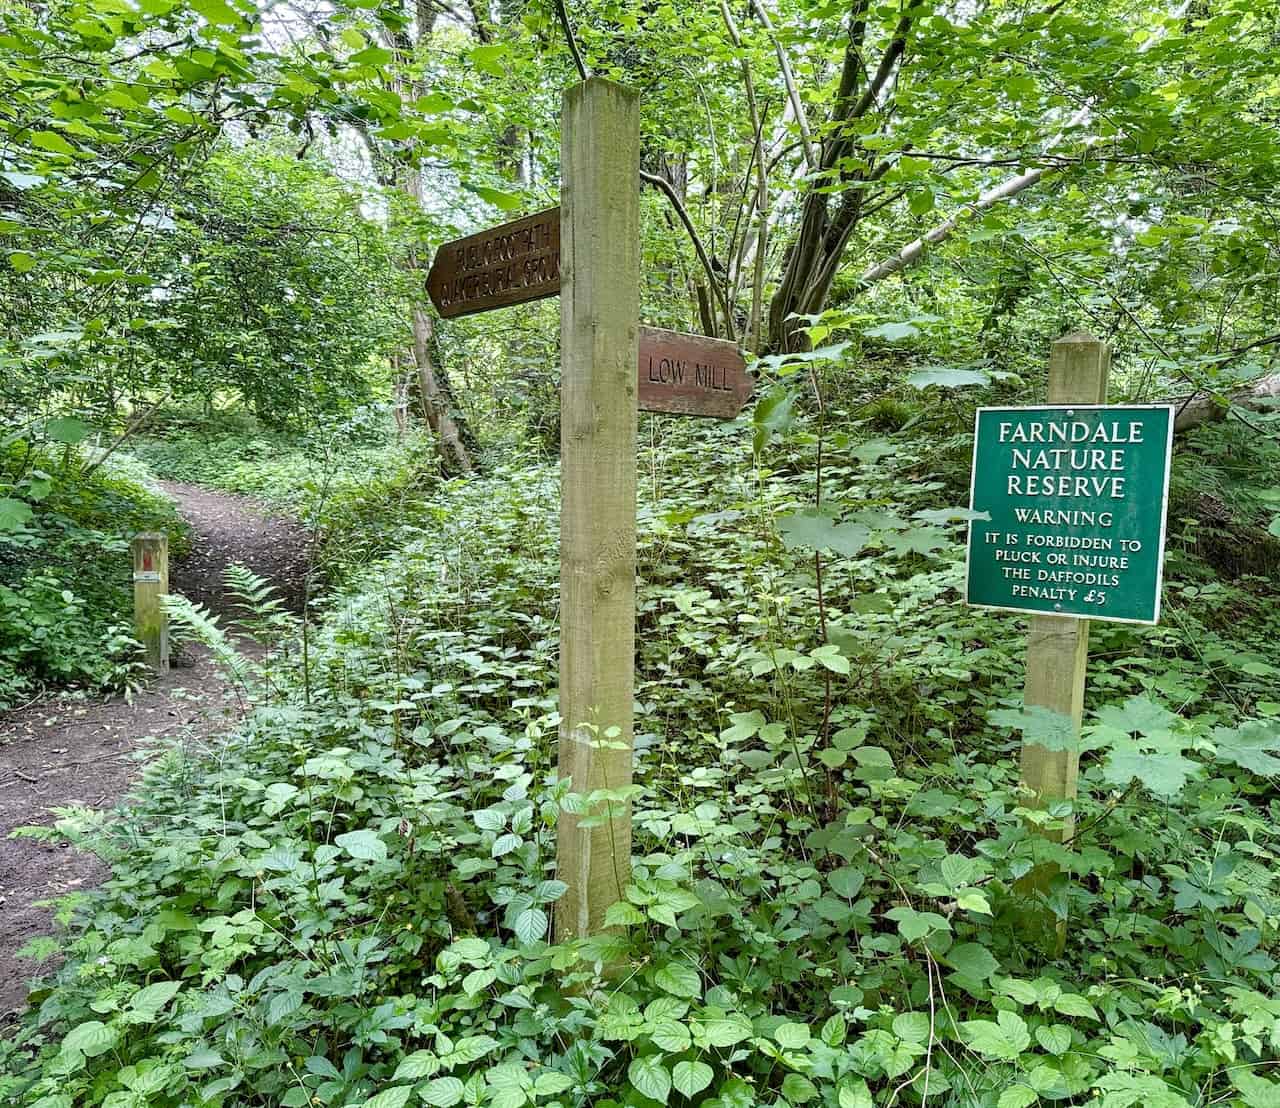 Signpost to the Quaker Burial Ground near the footbridge with a warning sign about not picking daffodils.
